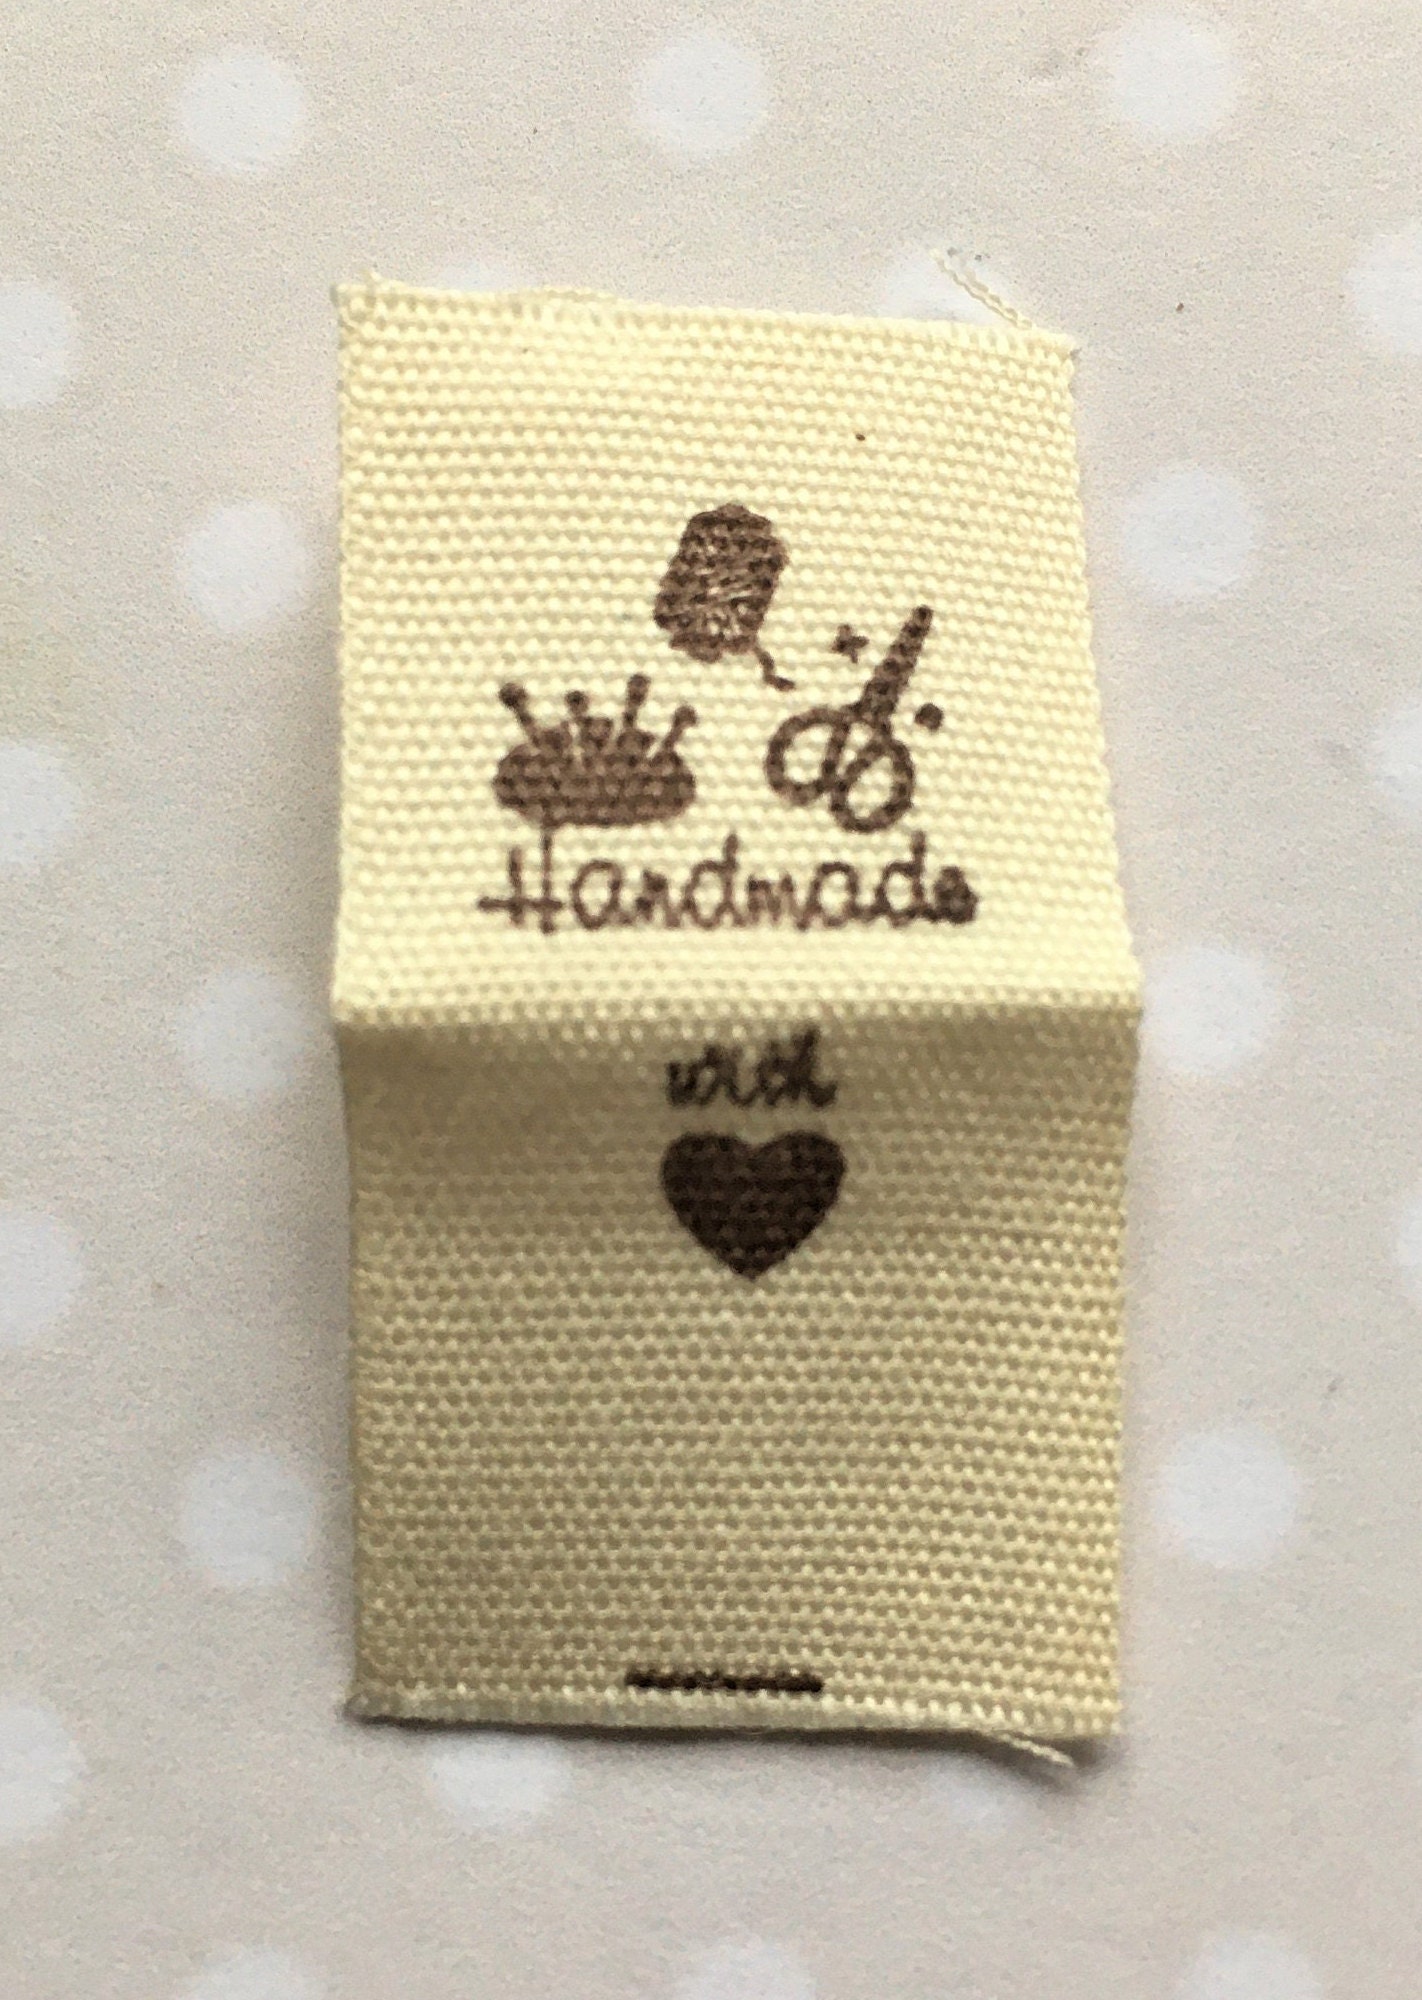 10 Labels - Handmade with love - 5 cm, Accessories